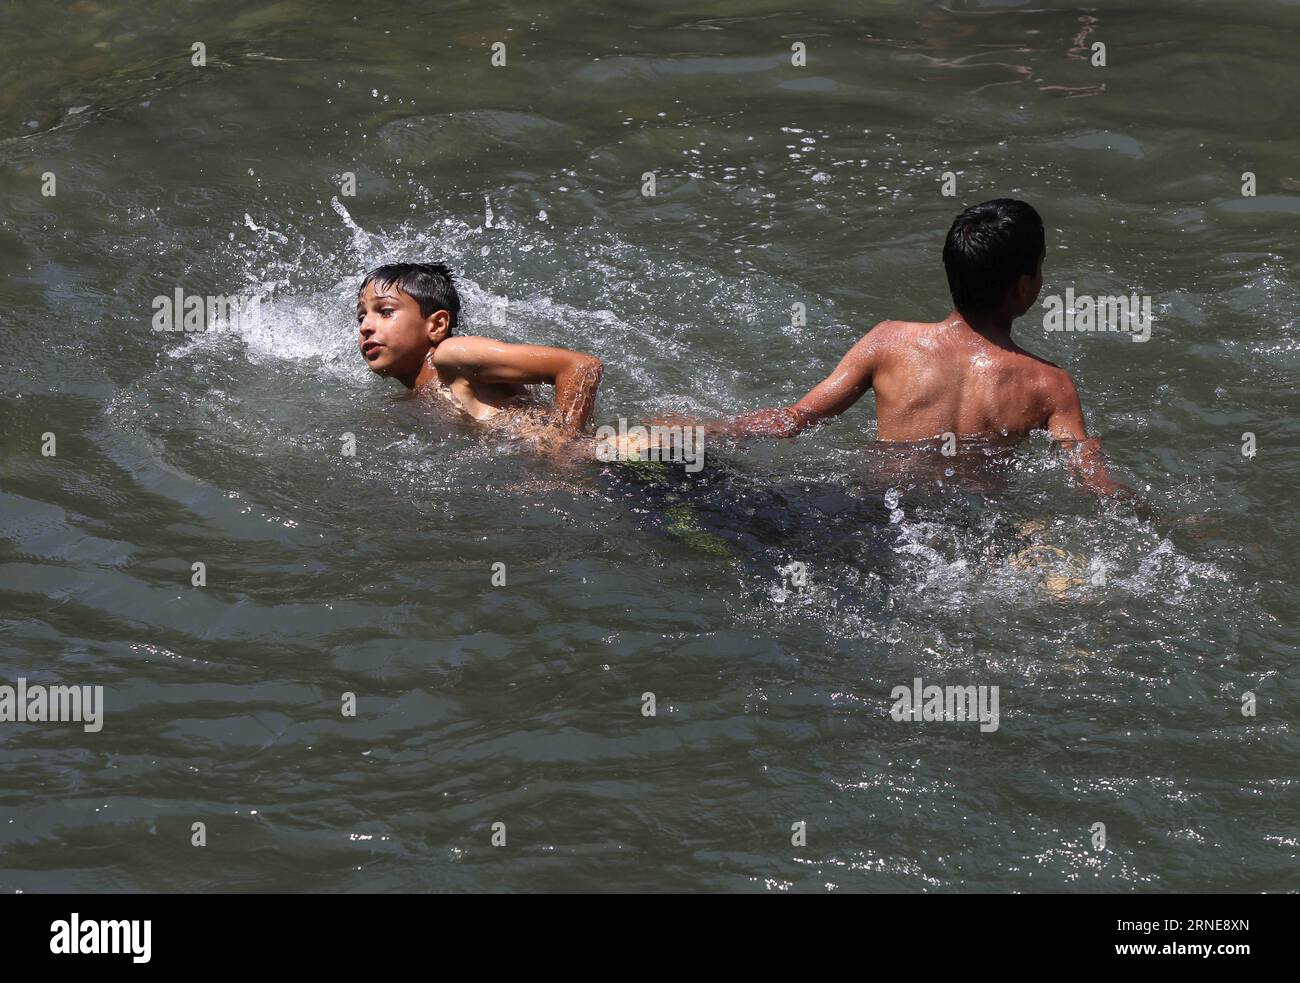 (160614) -- SRINAGAR, June 14, 2016 -- Kashmiri children bathe in a stream on a hot summer day on the outskirts of Srinagar, summer capital of Indian-controlled Kashmir, June 14, 2016. As Indian-controlled Kashmir witnessed hot weather for the past few days, people took shower in streams to beat the heat. ) KASHMIR-SRINAGAR-HOT WEATHER JavedxDar PUBLICATIONxNOTxINxCHN   160614 Srinagar June 14 2016 Kashmiri Children Bathe in a Stream ON a Hot Summer Day ON The outskirts of Srinagar Summer Capital of Indian Controlled Kashmir June 14 2016 As Indian Controlled Kashmir witnessed Hot Weather for T Stock Photo